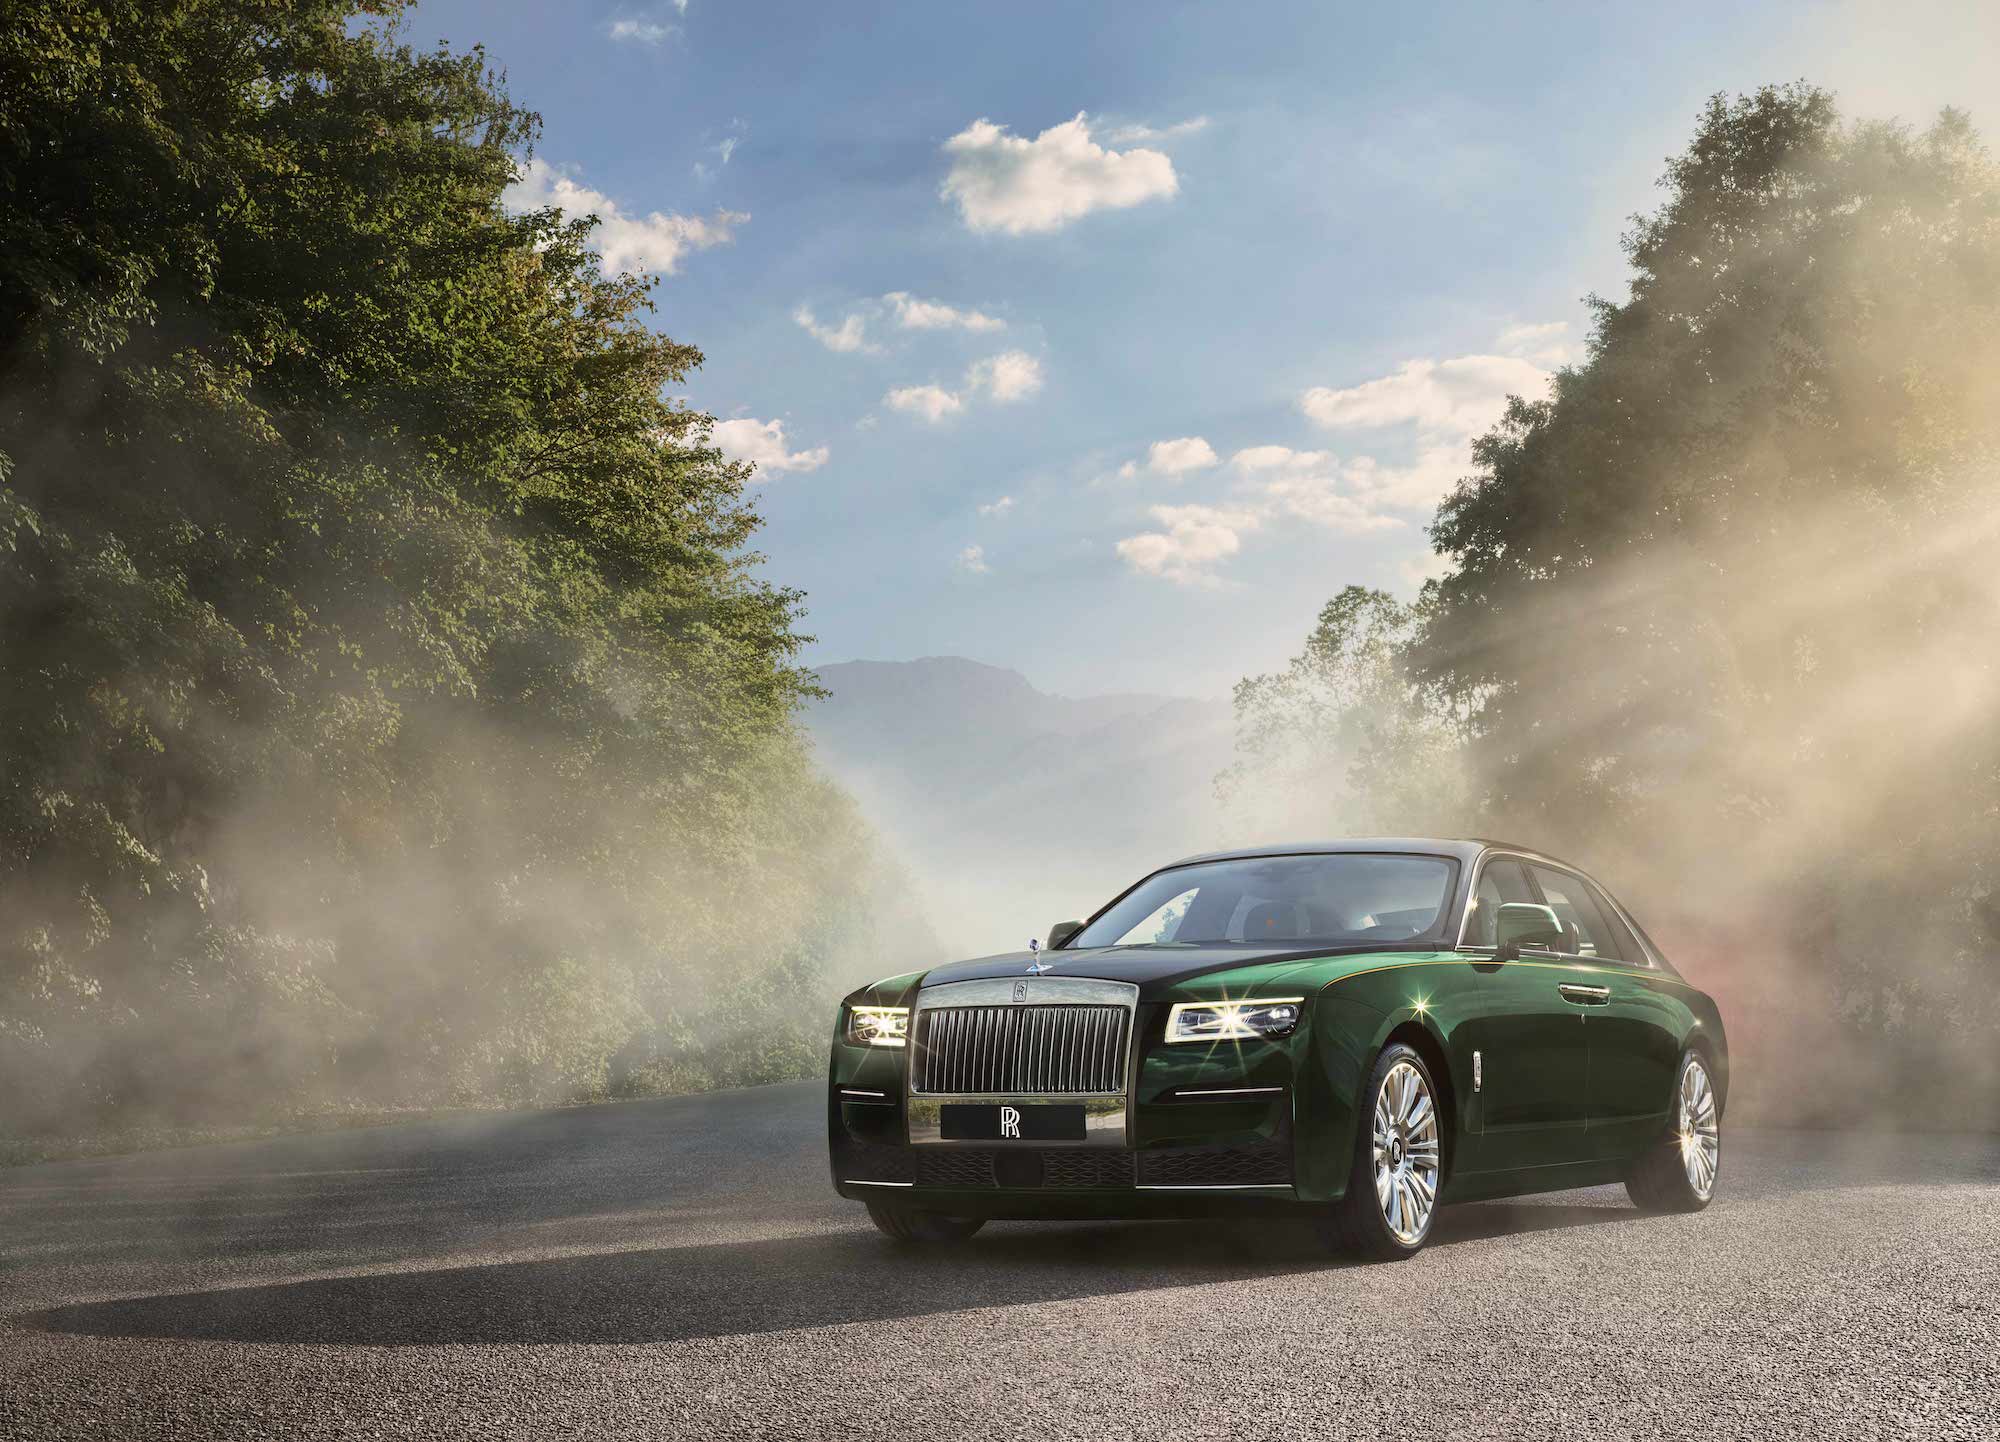 The New Rolls Royce Ghost Is An Evolution Of Refined Elegance